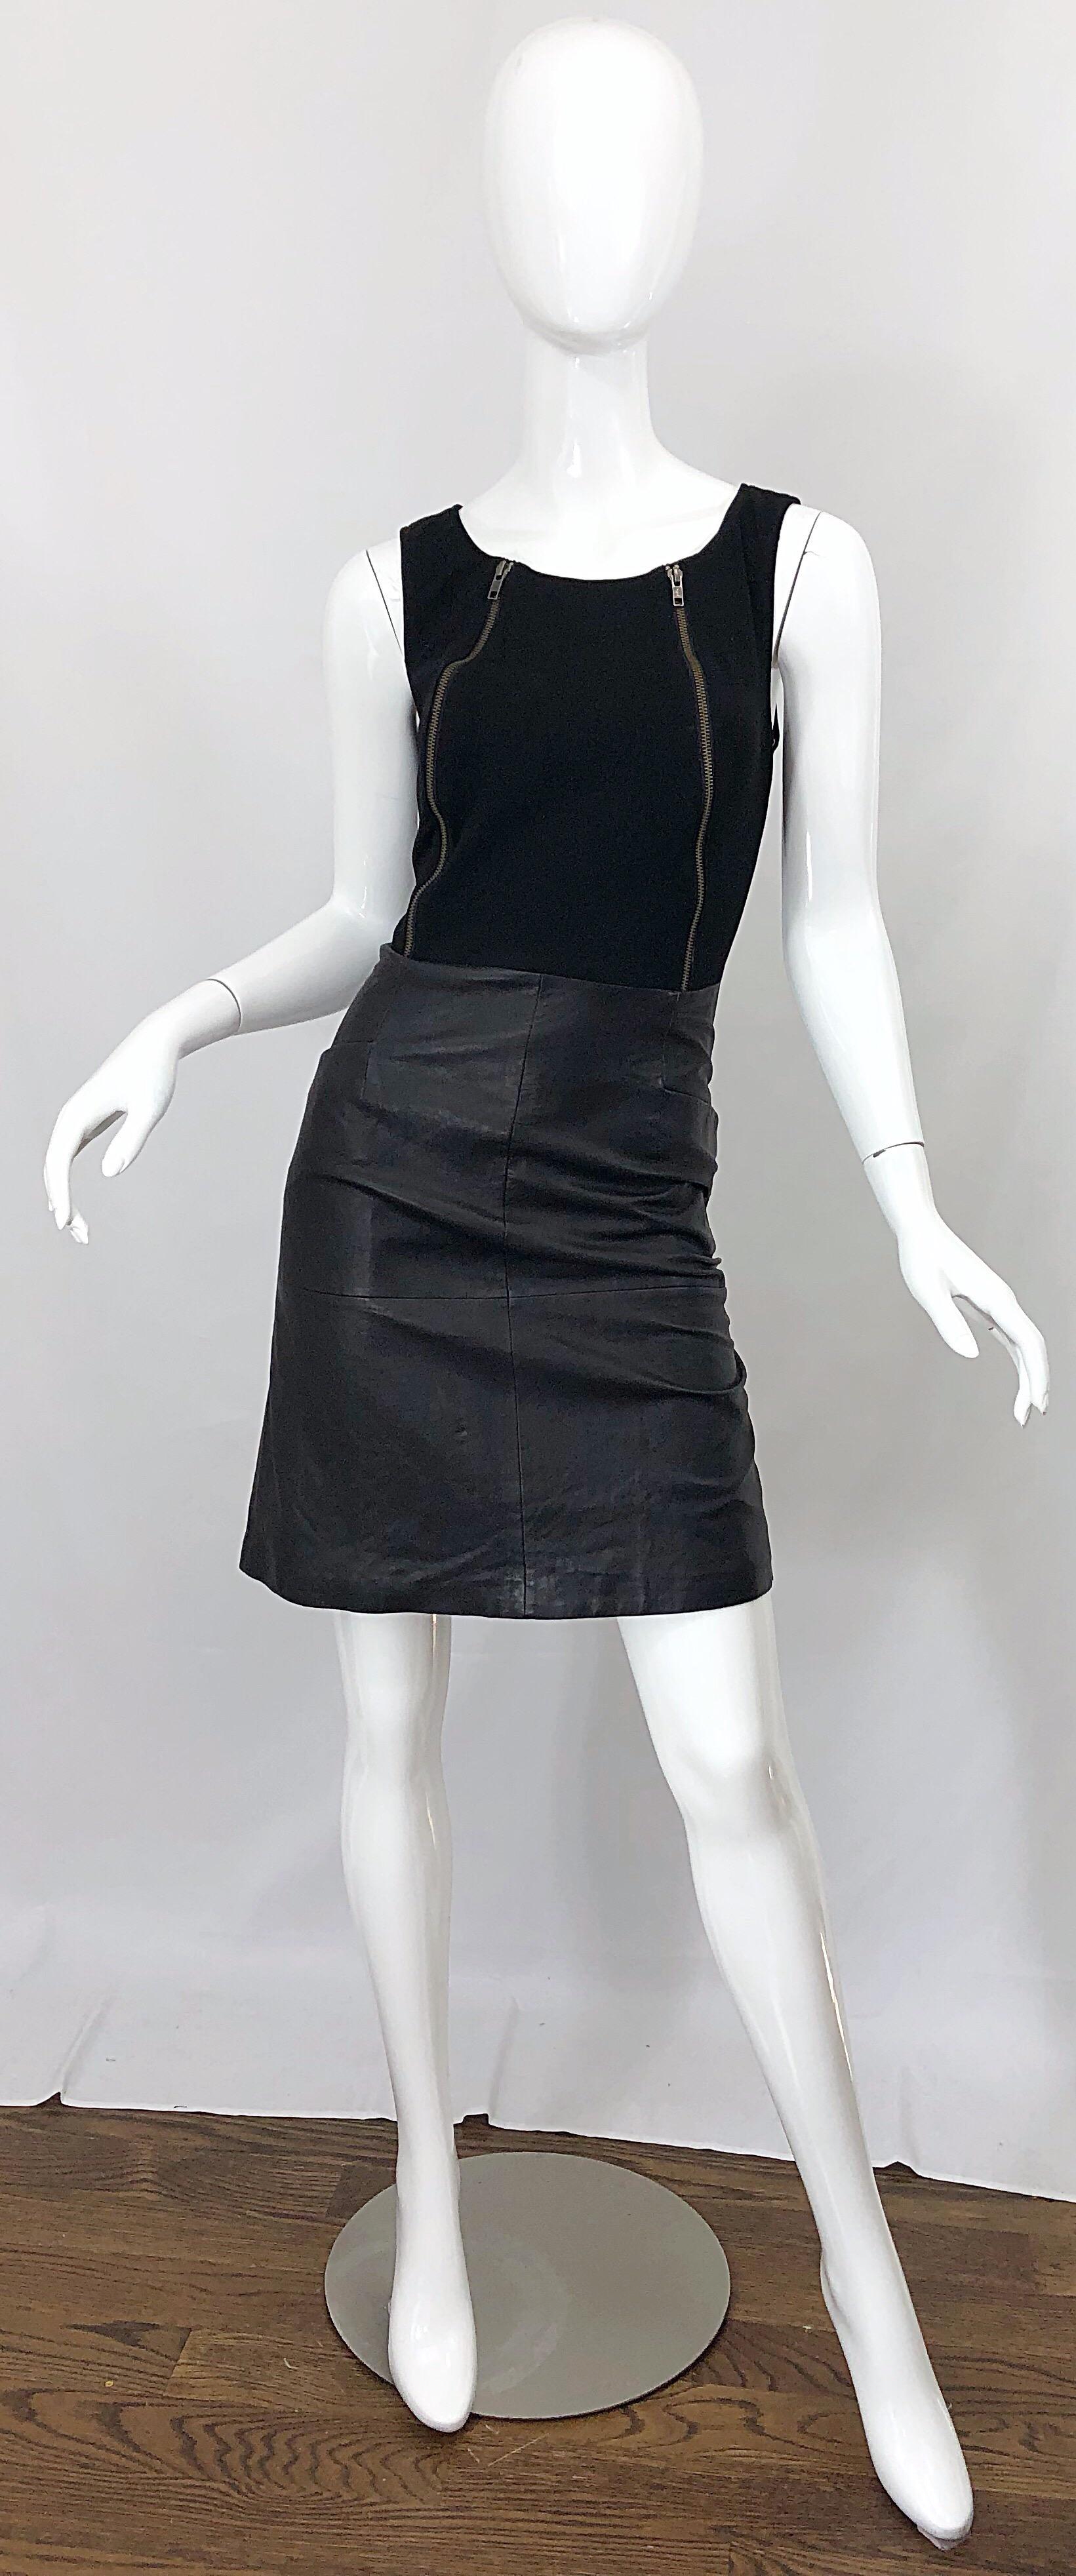 New with tags 1990s JEAN LOUIS SCHERRER black rayon and leather bodycon zipper dress! Features a fitted rayon bodice with zippers at either side of the bust. Flattering black leather skirt features pockets at each side of the waist. Hidden zipper up